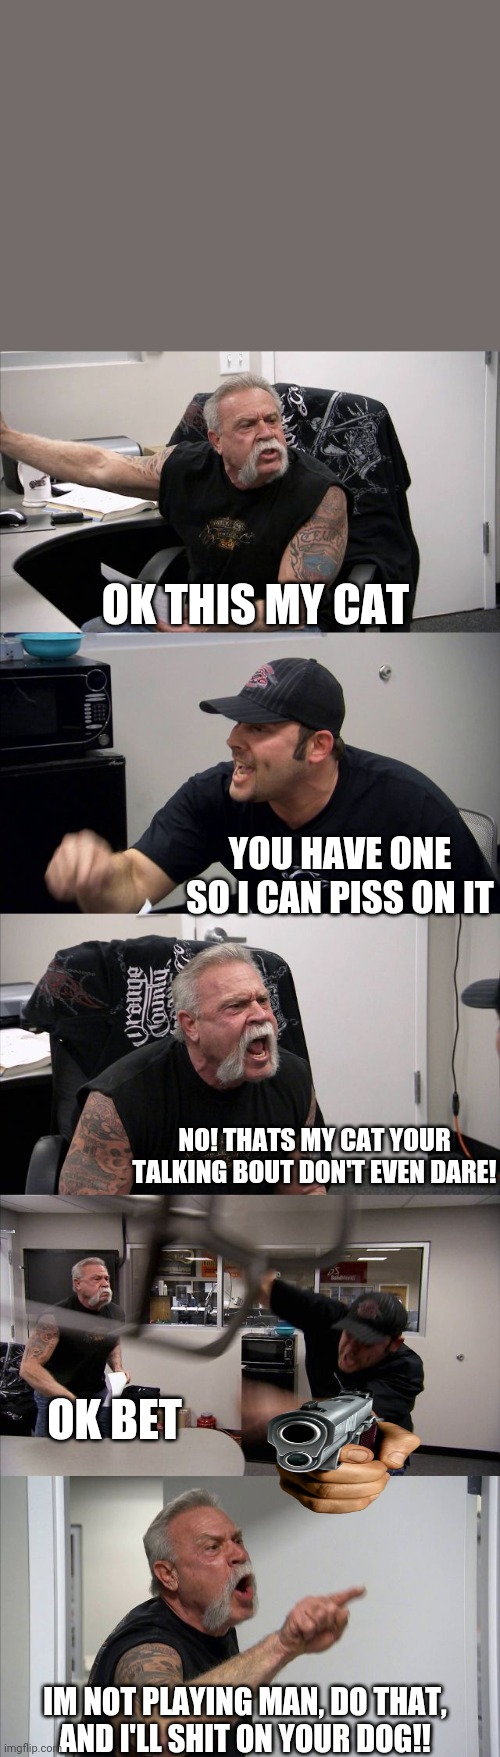 American Chopper Argument Meme | OK THIS MY CAT; YOU HAVE ONE SO I CAN PISS ON IT; NO! THATS MY CAT YOUR TALKING BOUT DON'T EVEN DARE! OK BET; IM NOT PLAYING MAN, DO THAT,
AND I'LL SHIT ON YOUR DOG!! | image tagged in memes,american chopper argument | made w/ Imgflip meme maker